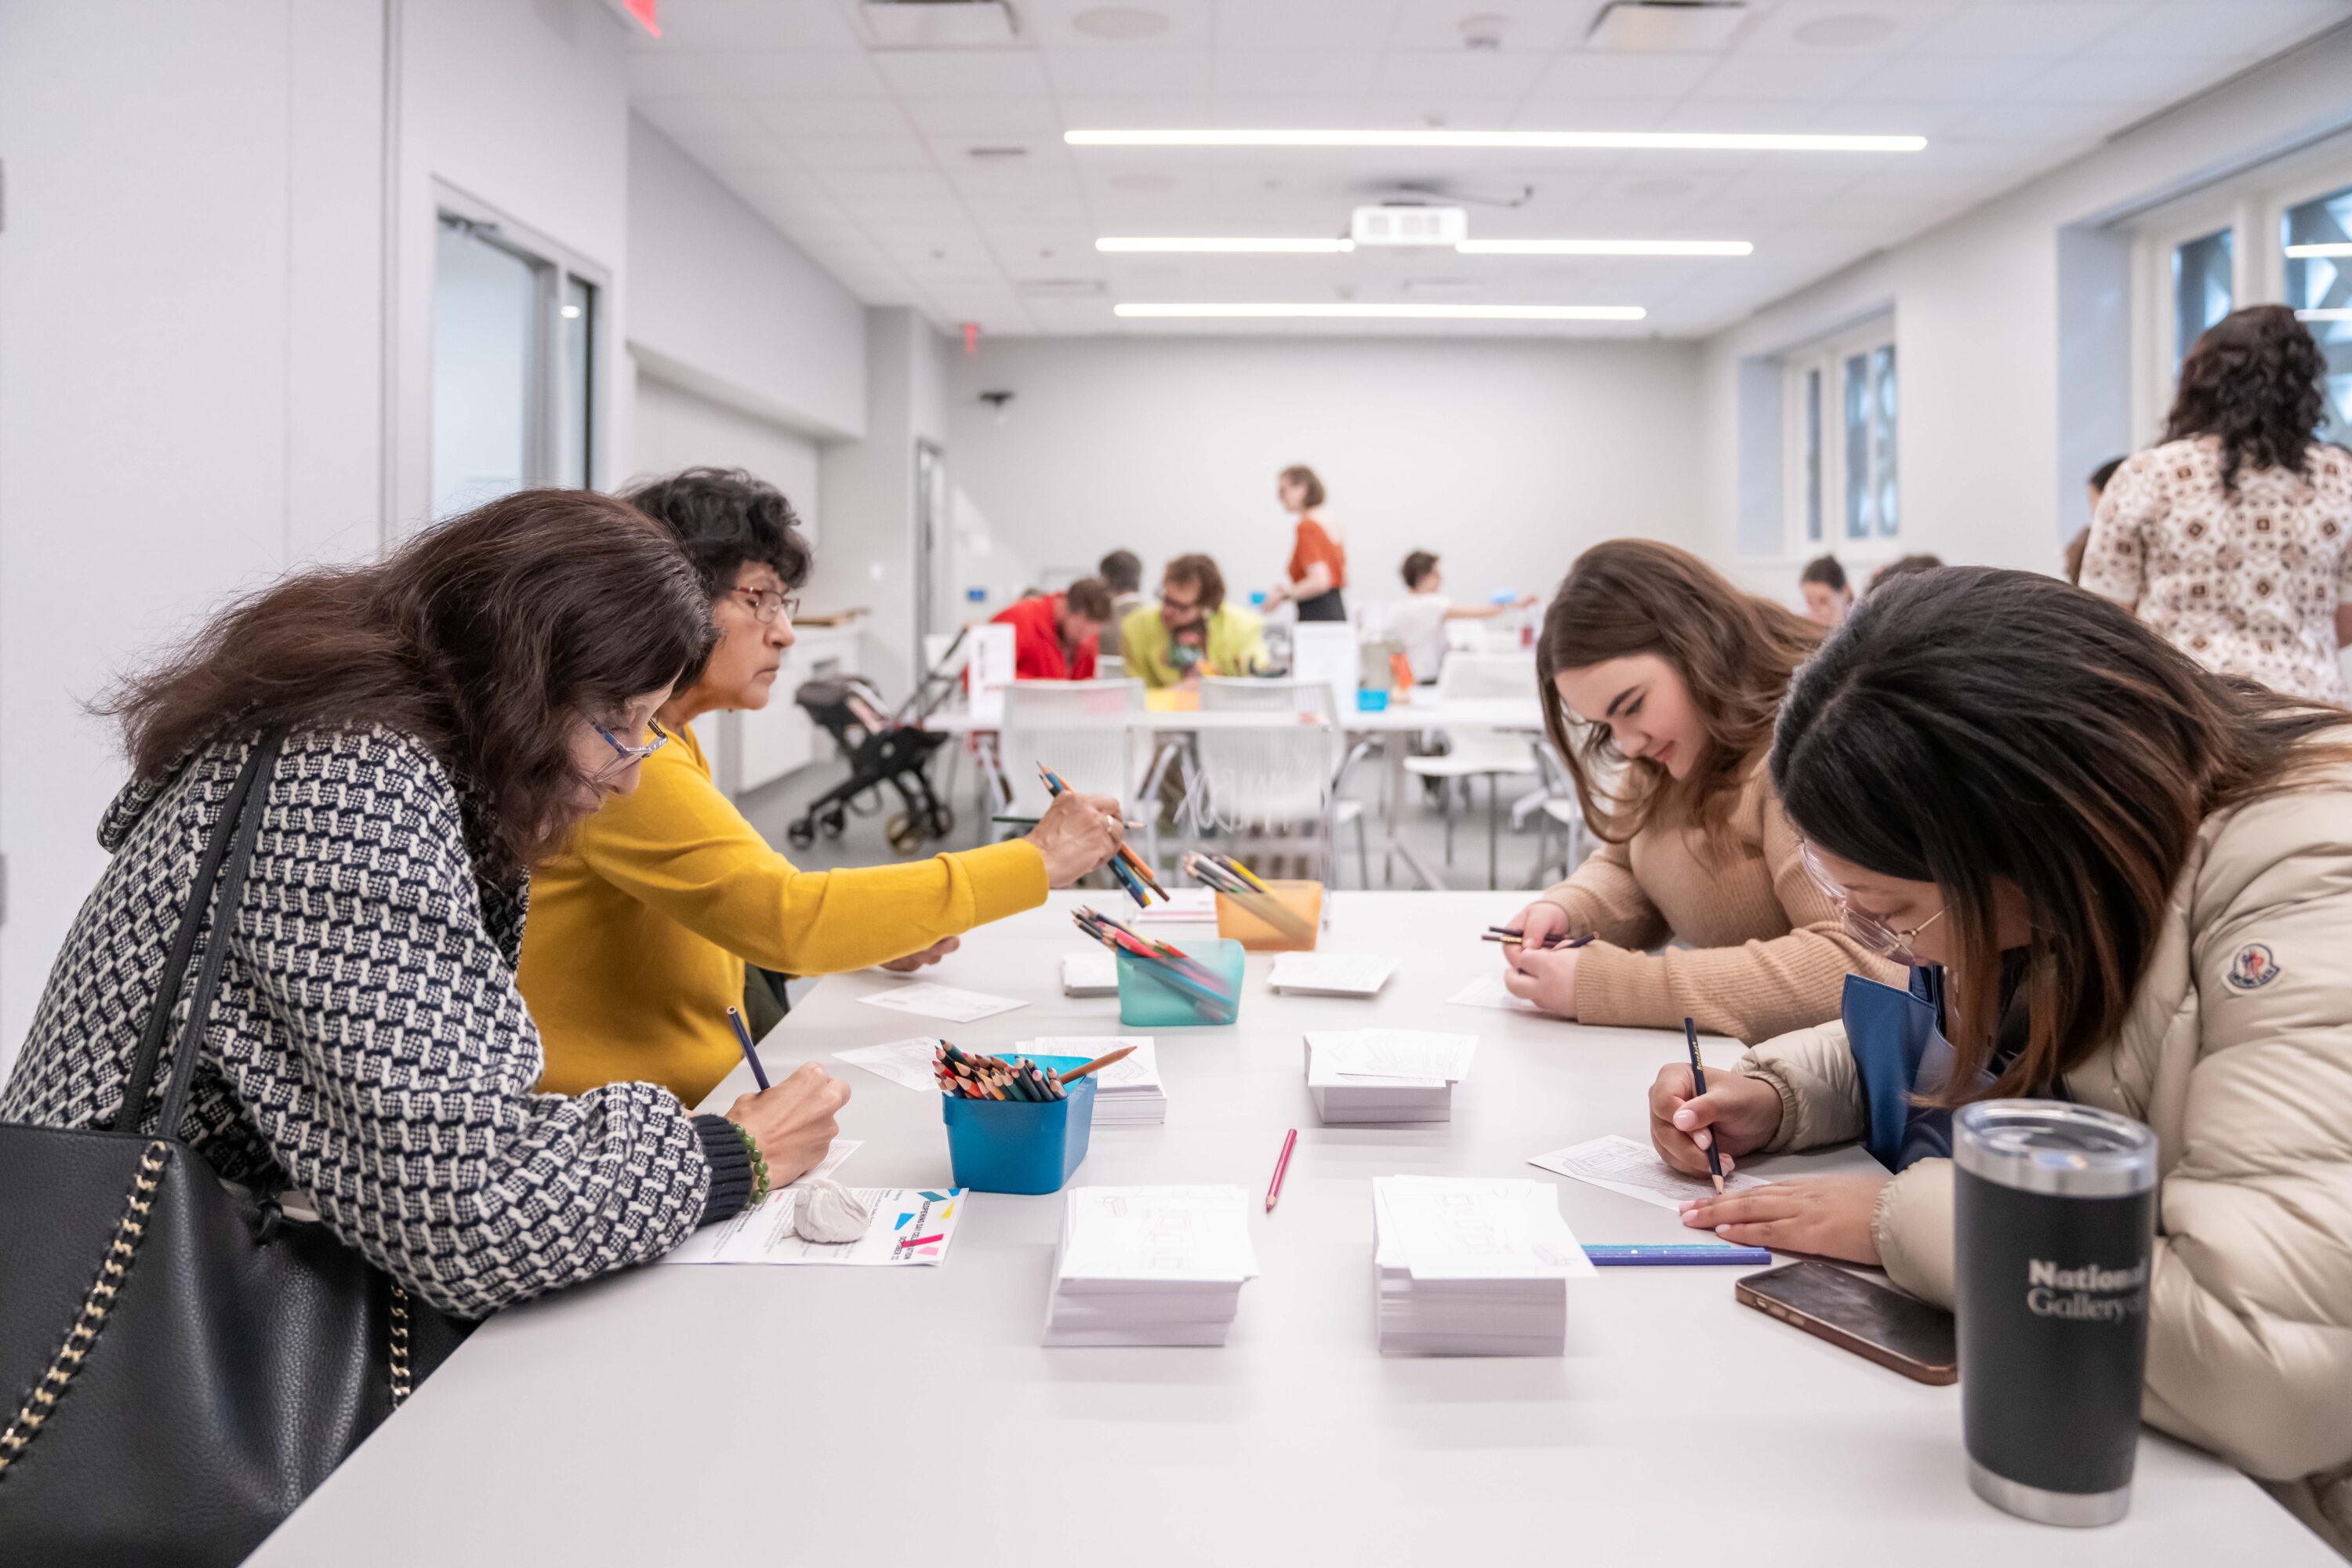 Four women of different ages sit at a white table in a large studio/classroom space. They use colored pencils to color a postcard-size paper. In the background many other people are in the room at other tables doing the same.